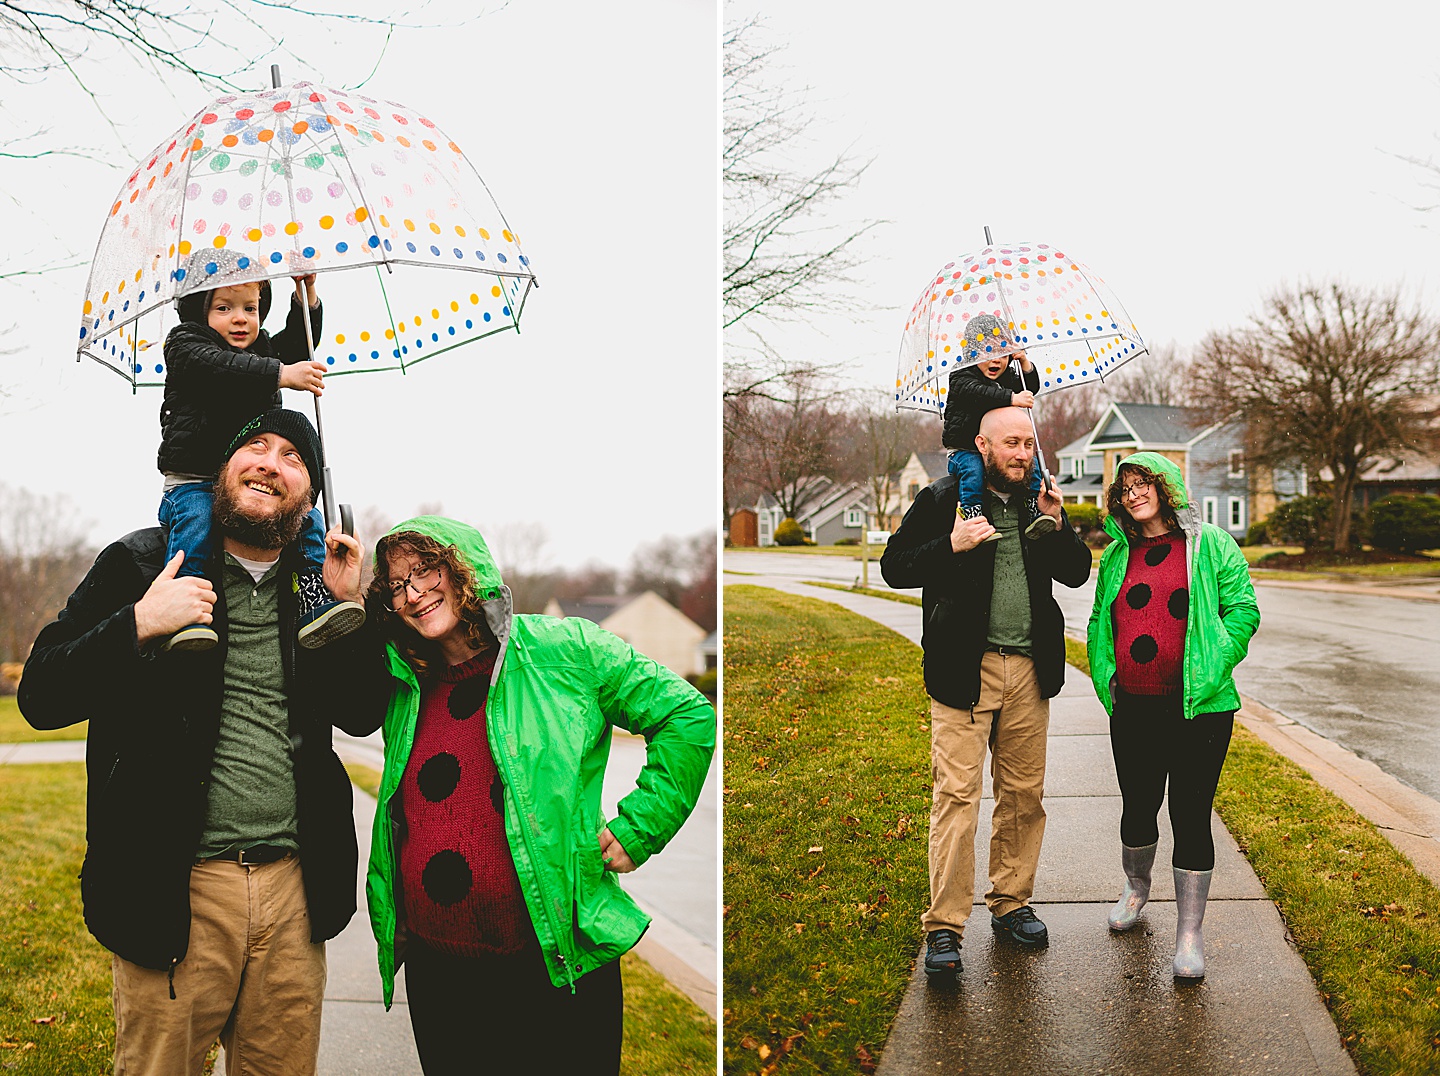 Parents taking a rainy day walk with toddler down the street